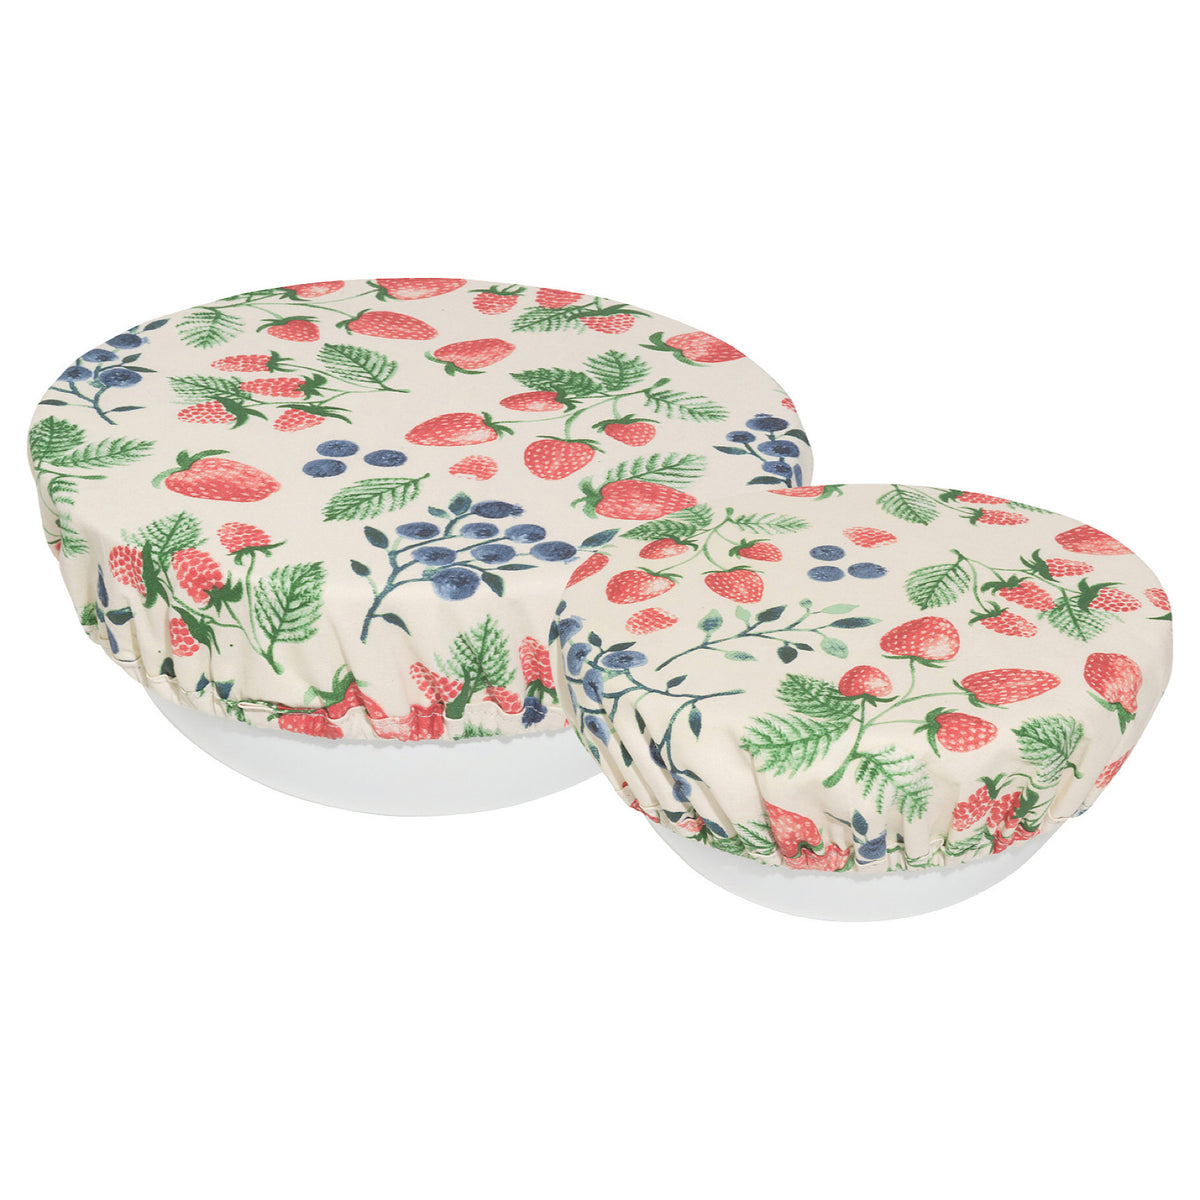 Berry Patch Bowl Covers, Set of 2